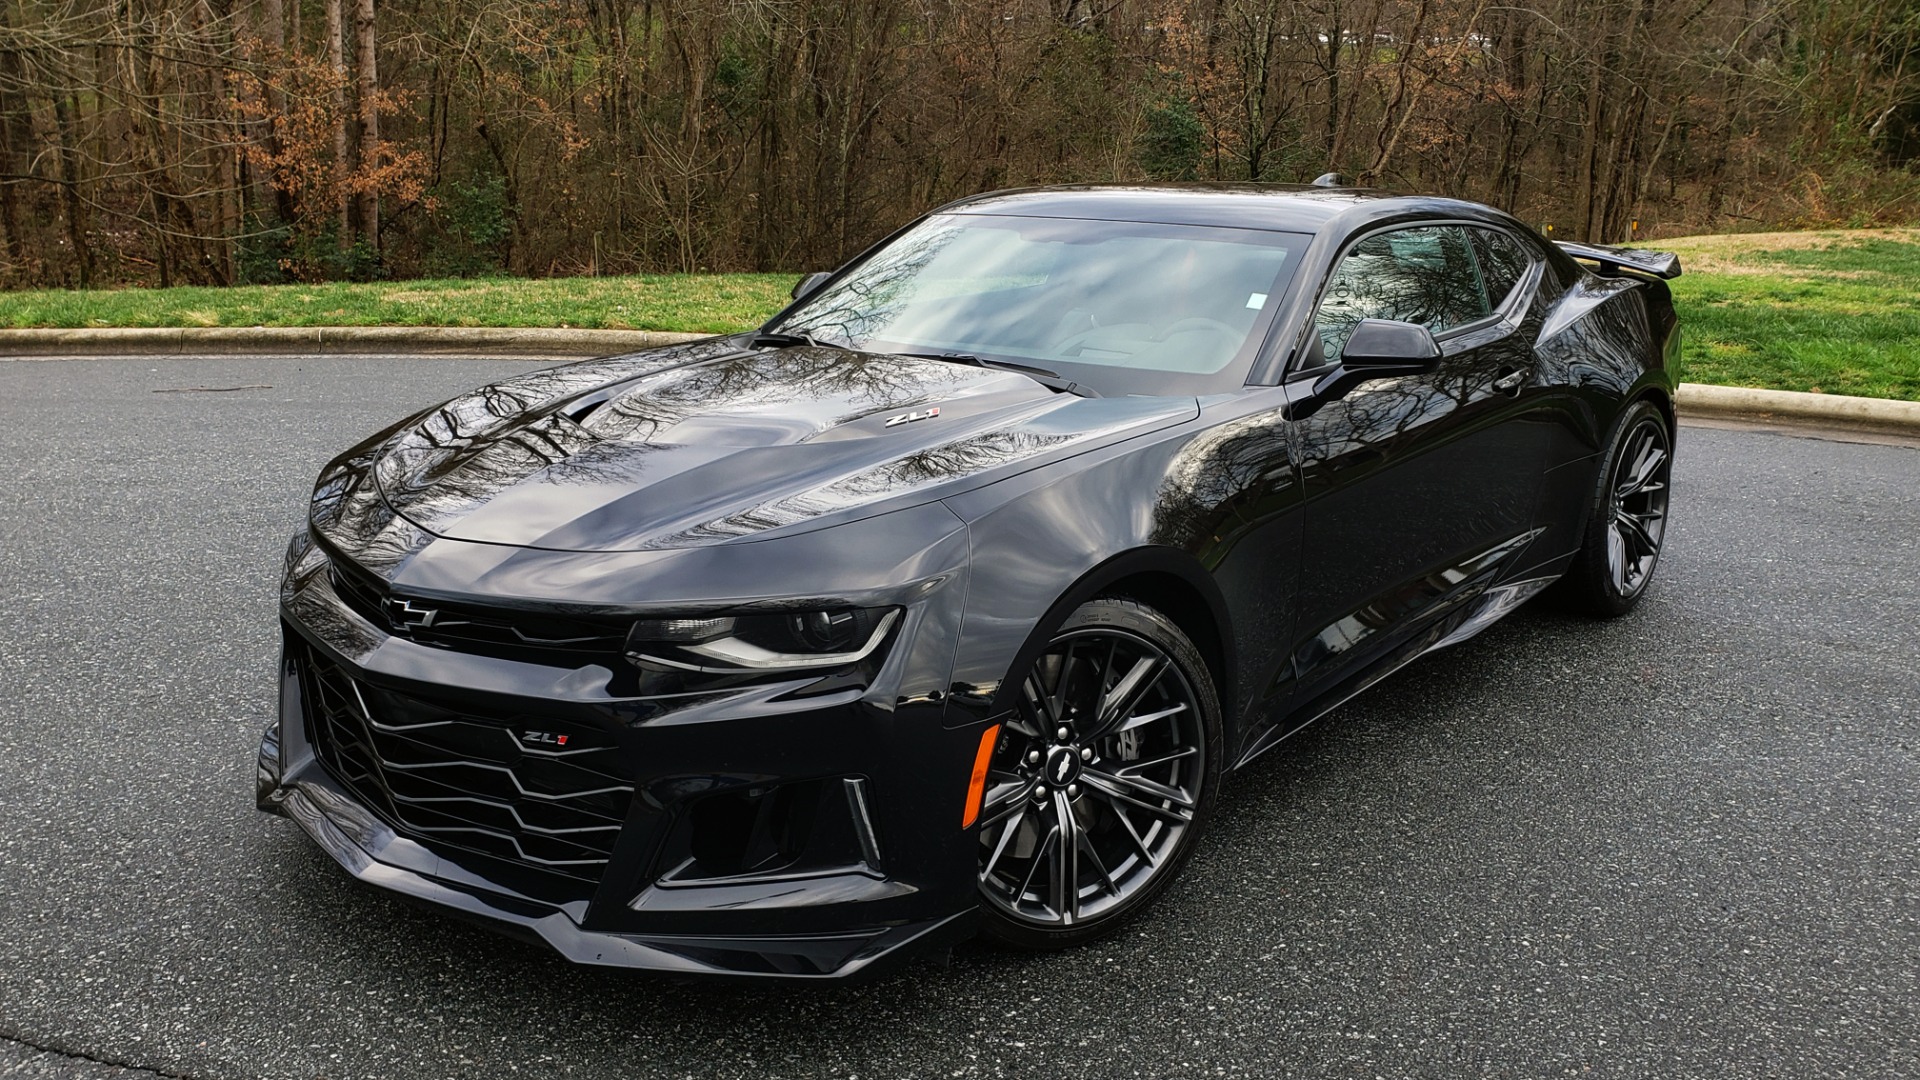 Used 2018 Chevrolet CAMARO ZL1 6.2L SUPERCHARGED V8 650 / NAV / SUNROOF / REARVIEW for sale Sold at Formula Imports in Charlotte NC 28227 1